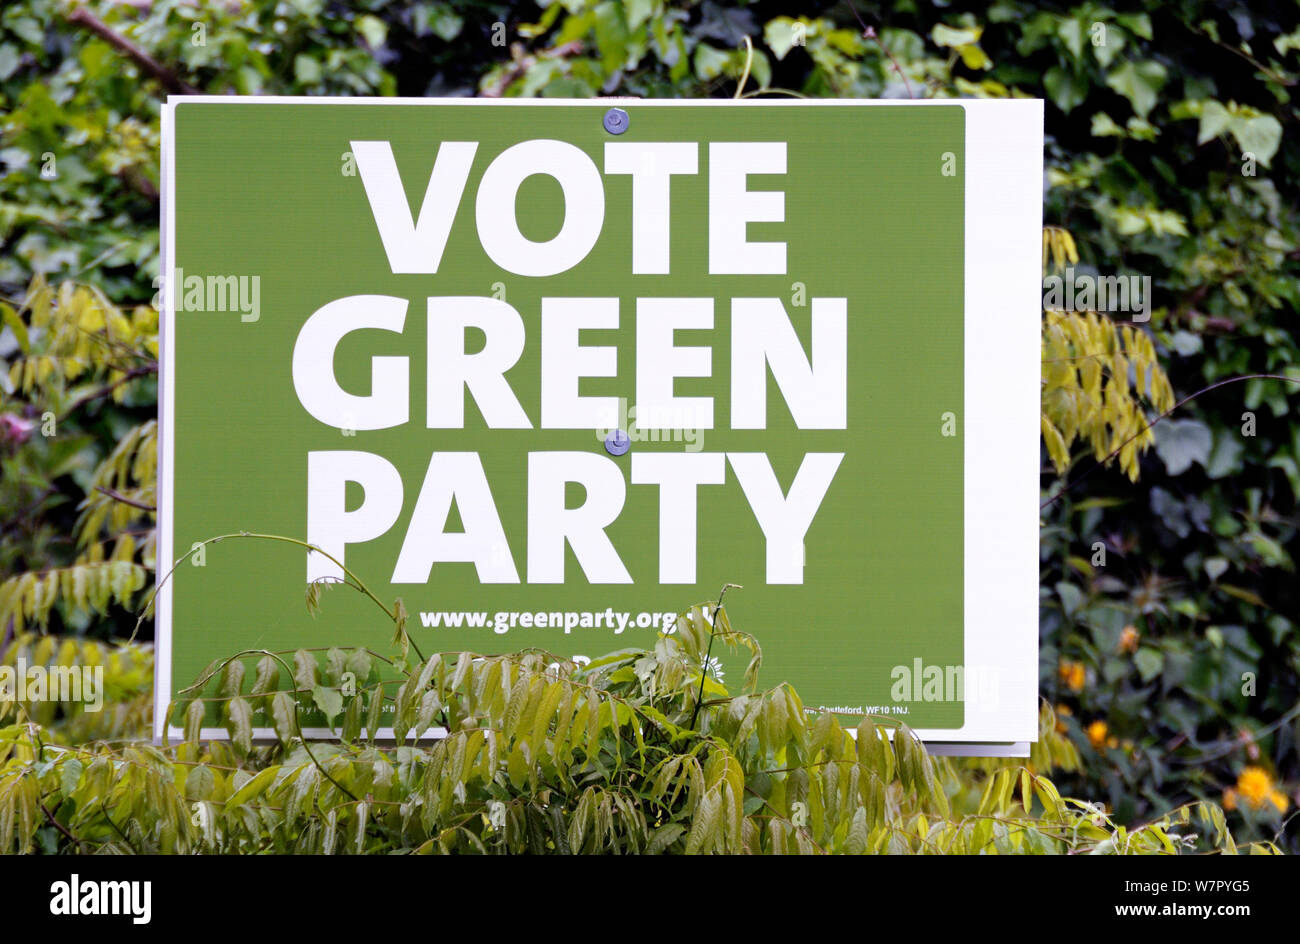 Vote Green Party banner amongst greenery, London Borough of Richmond upon Thames Stock Photo